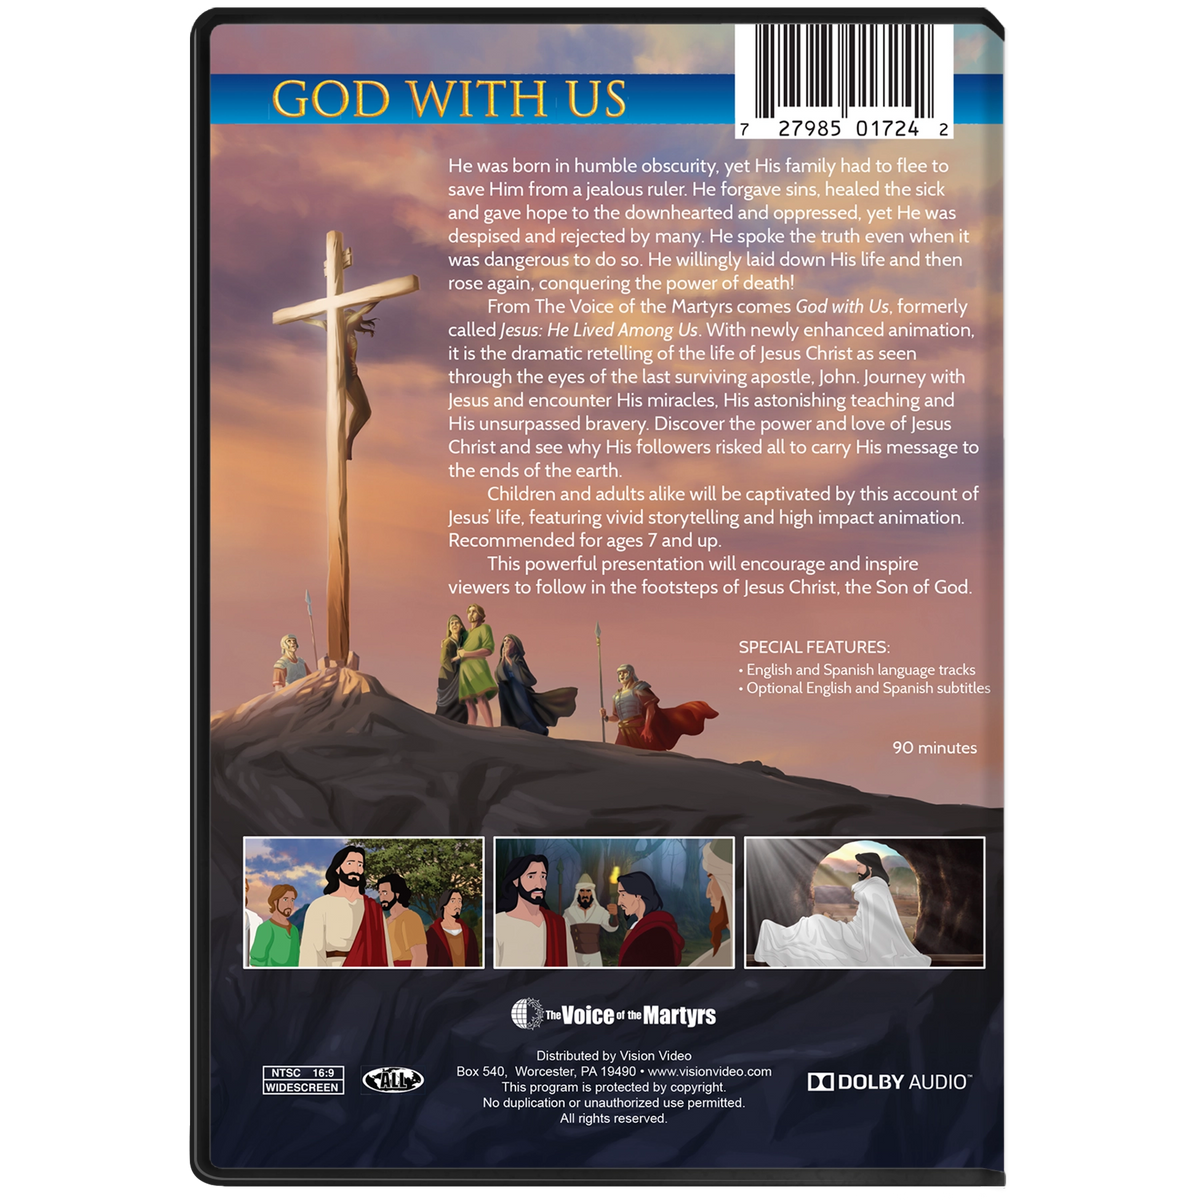 God With Us - The Coming of the Savior